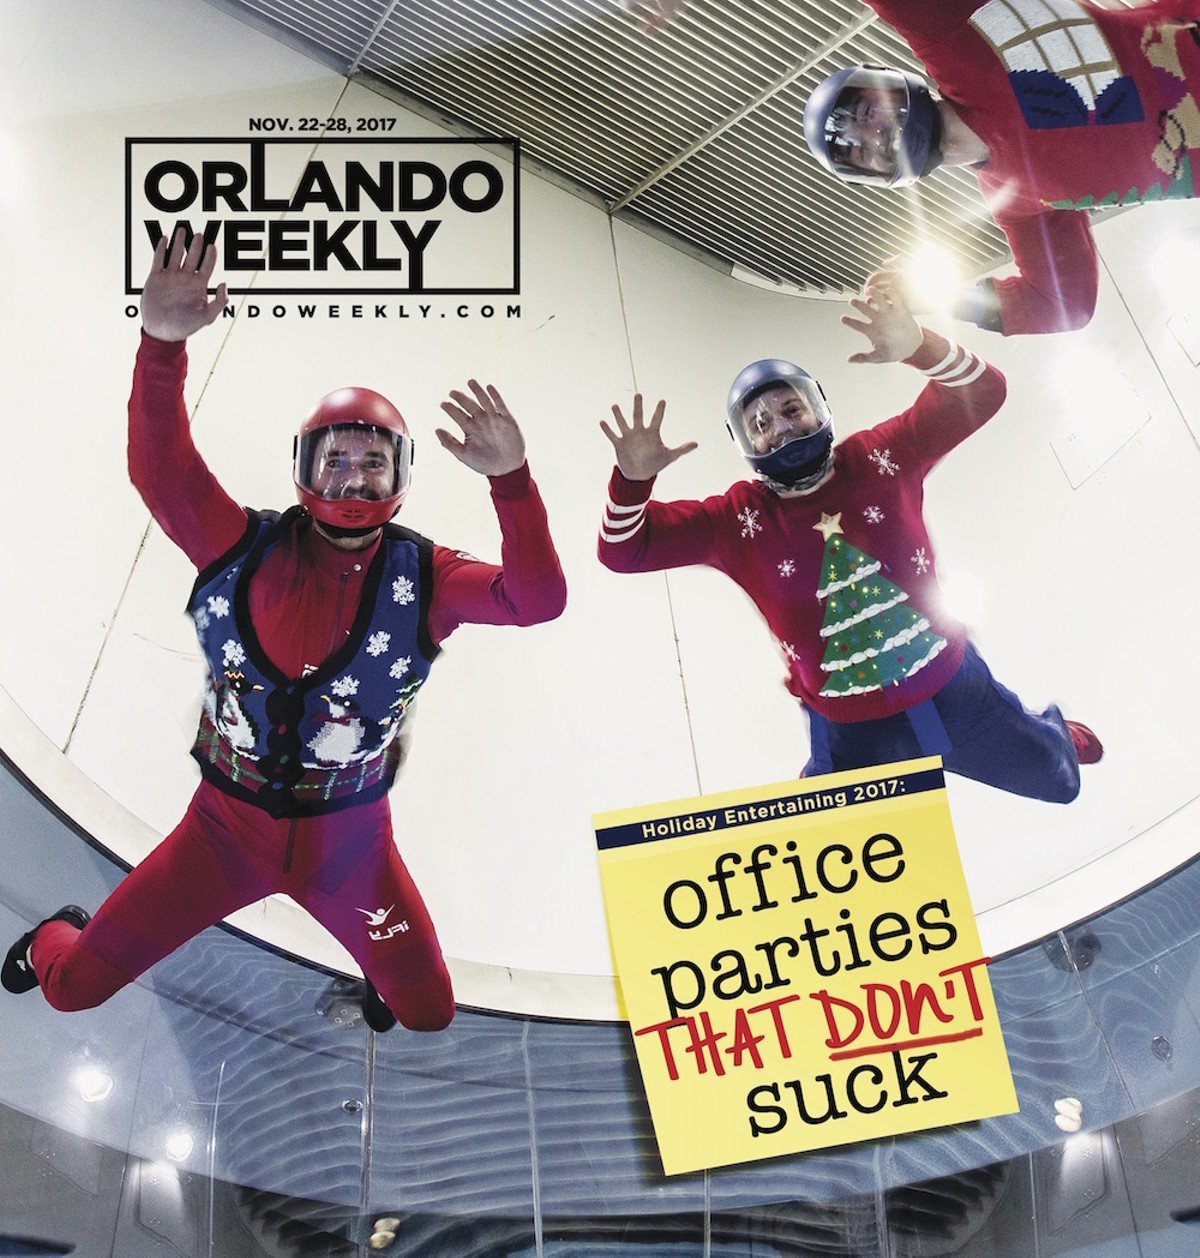 Seven Orlando spots where you can have a holiday office party that doesn’t suck